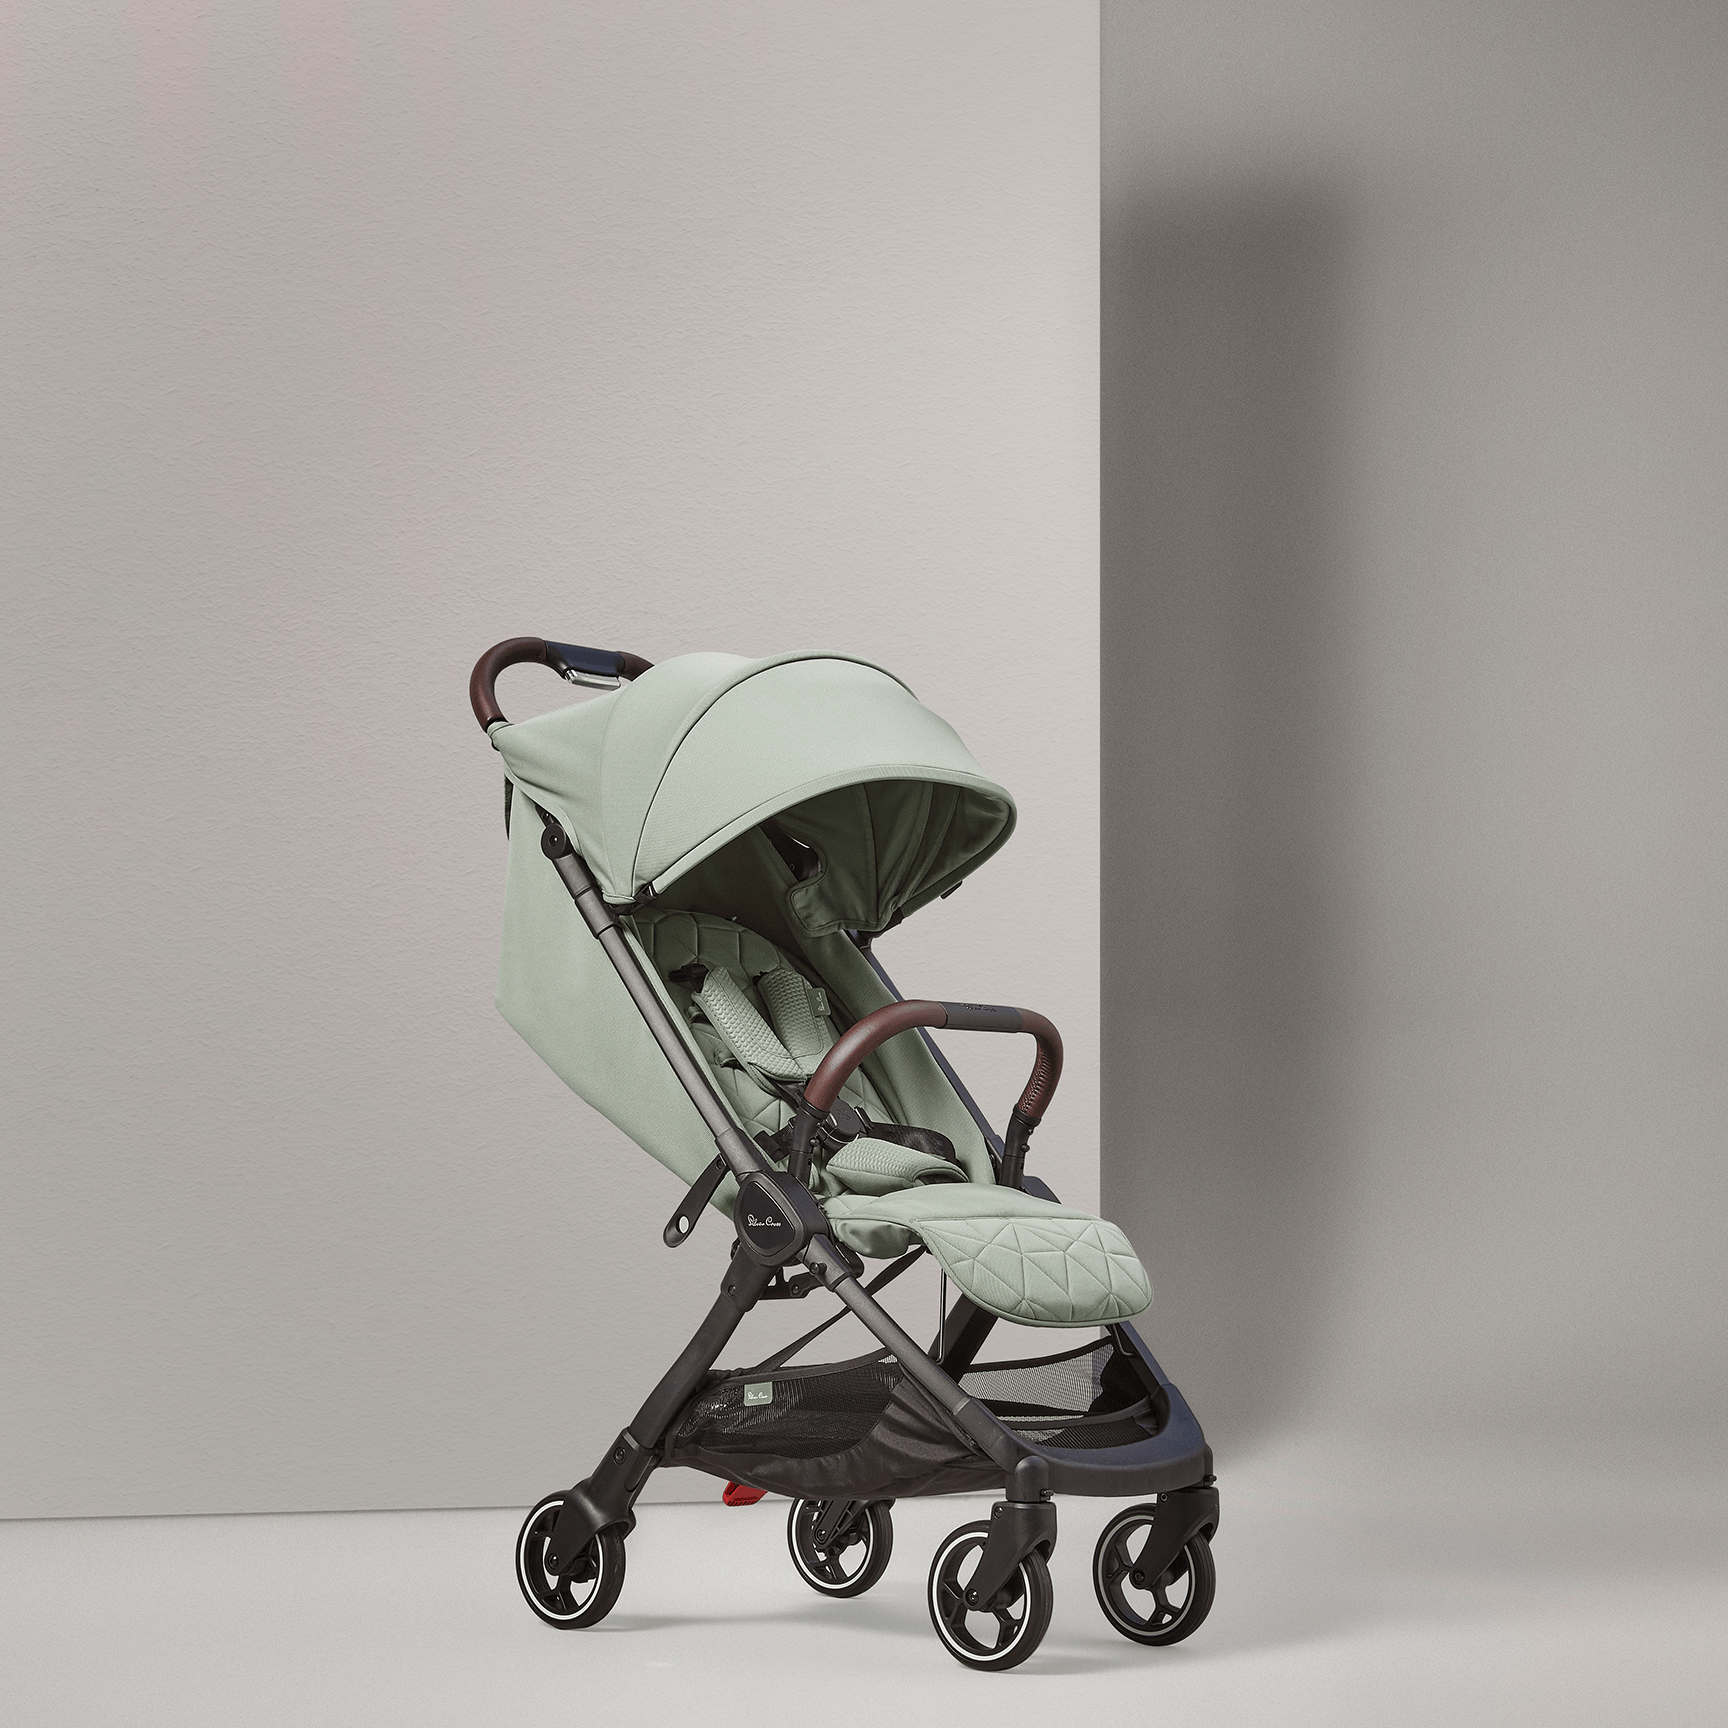 Silver Cross Clic in Sage Pushchairs & Buggies SX2284.SE 5055836925749